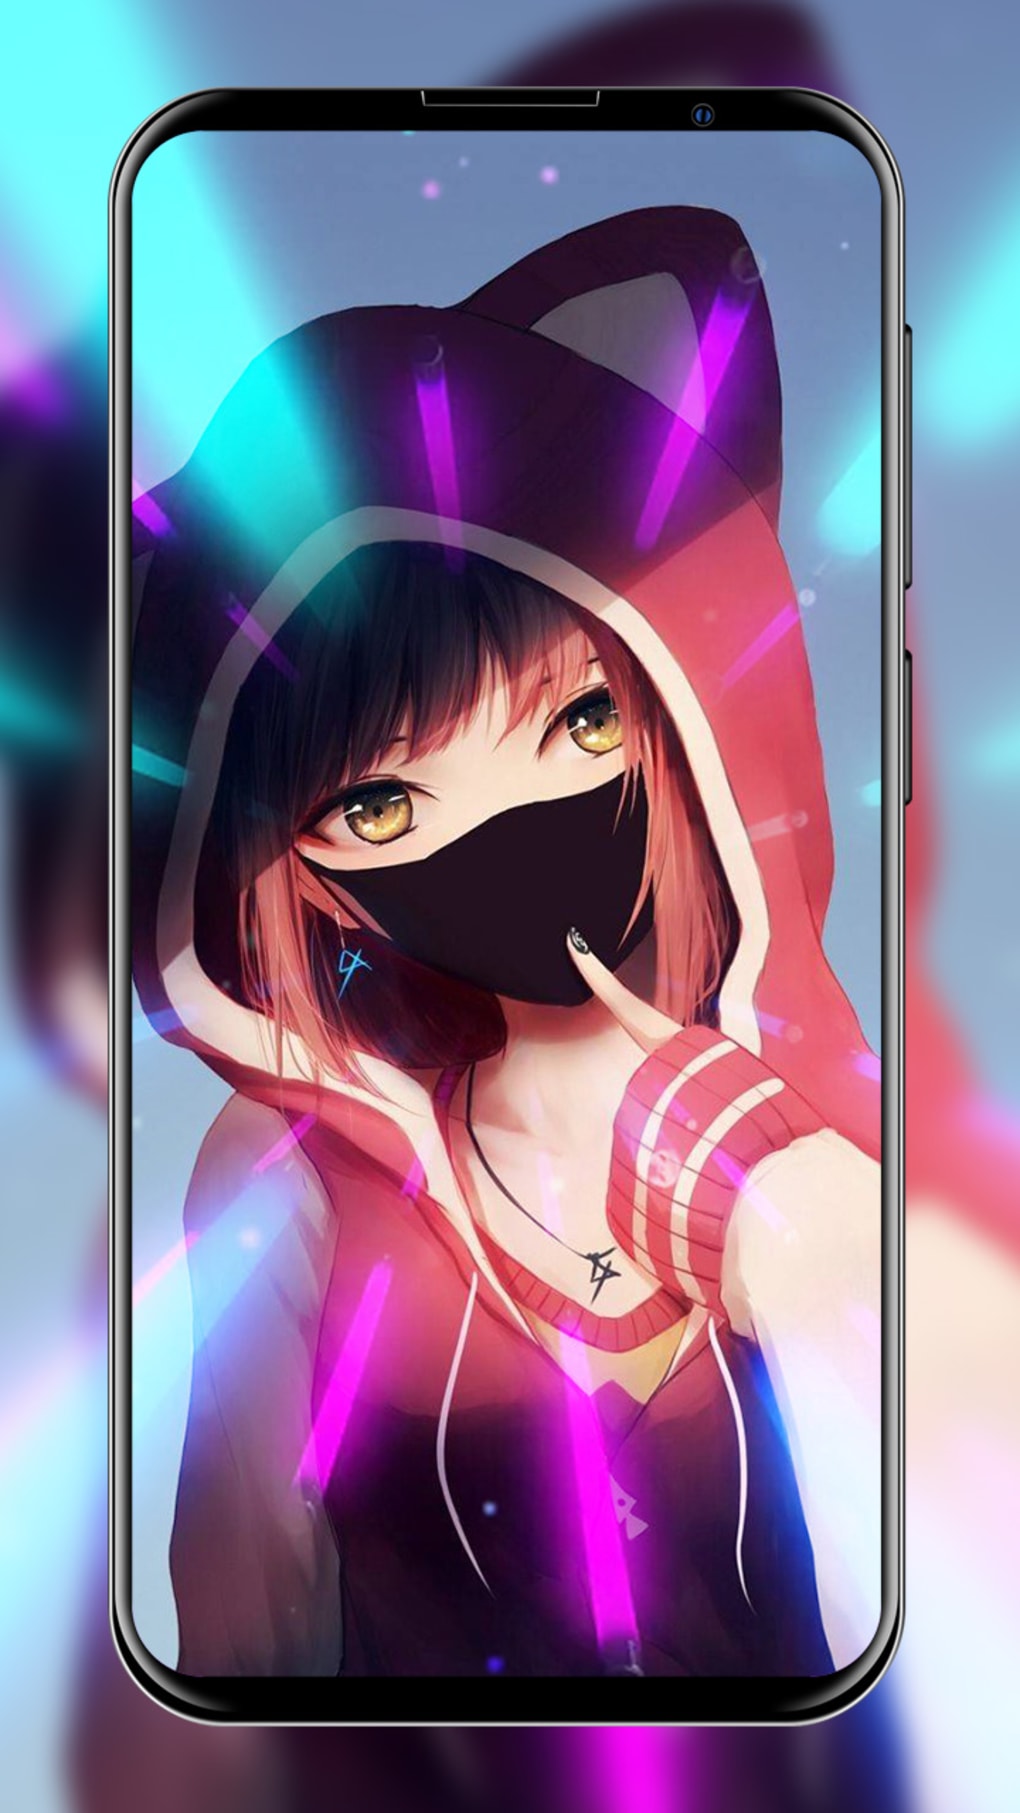 Anime Girl HD Wallpapers Pro::Appstore for Android